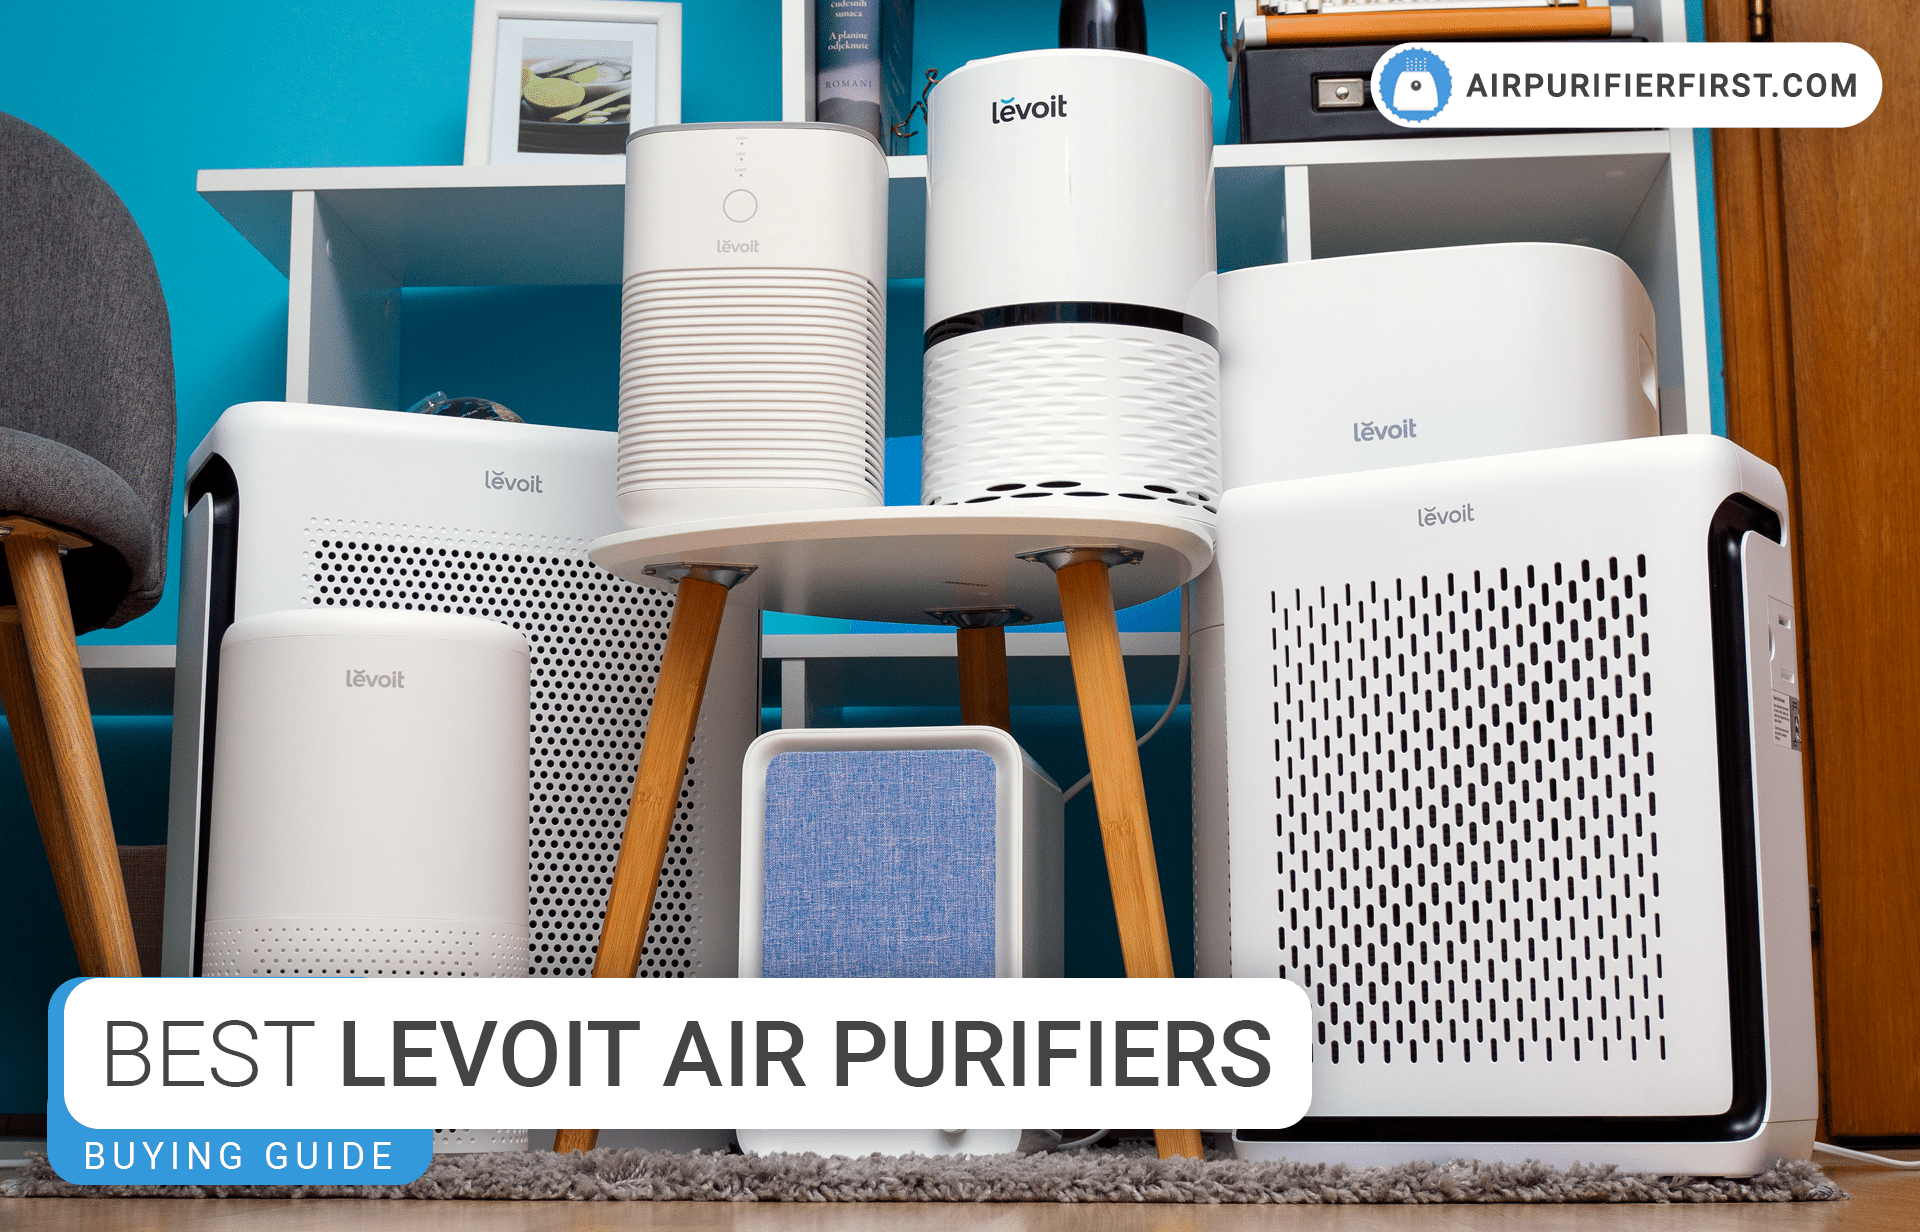 Best Levoit Air Purifiers - Hands-on Guide